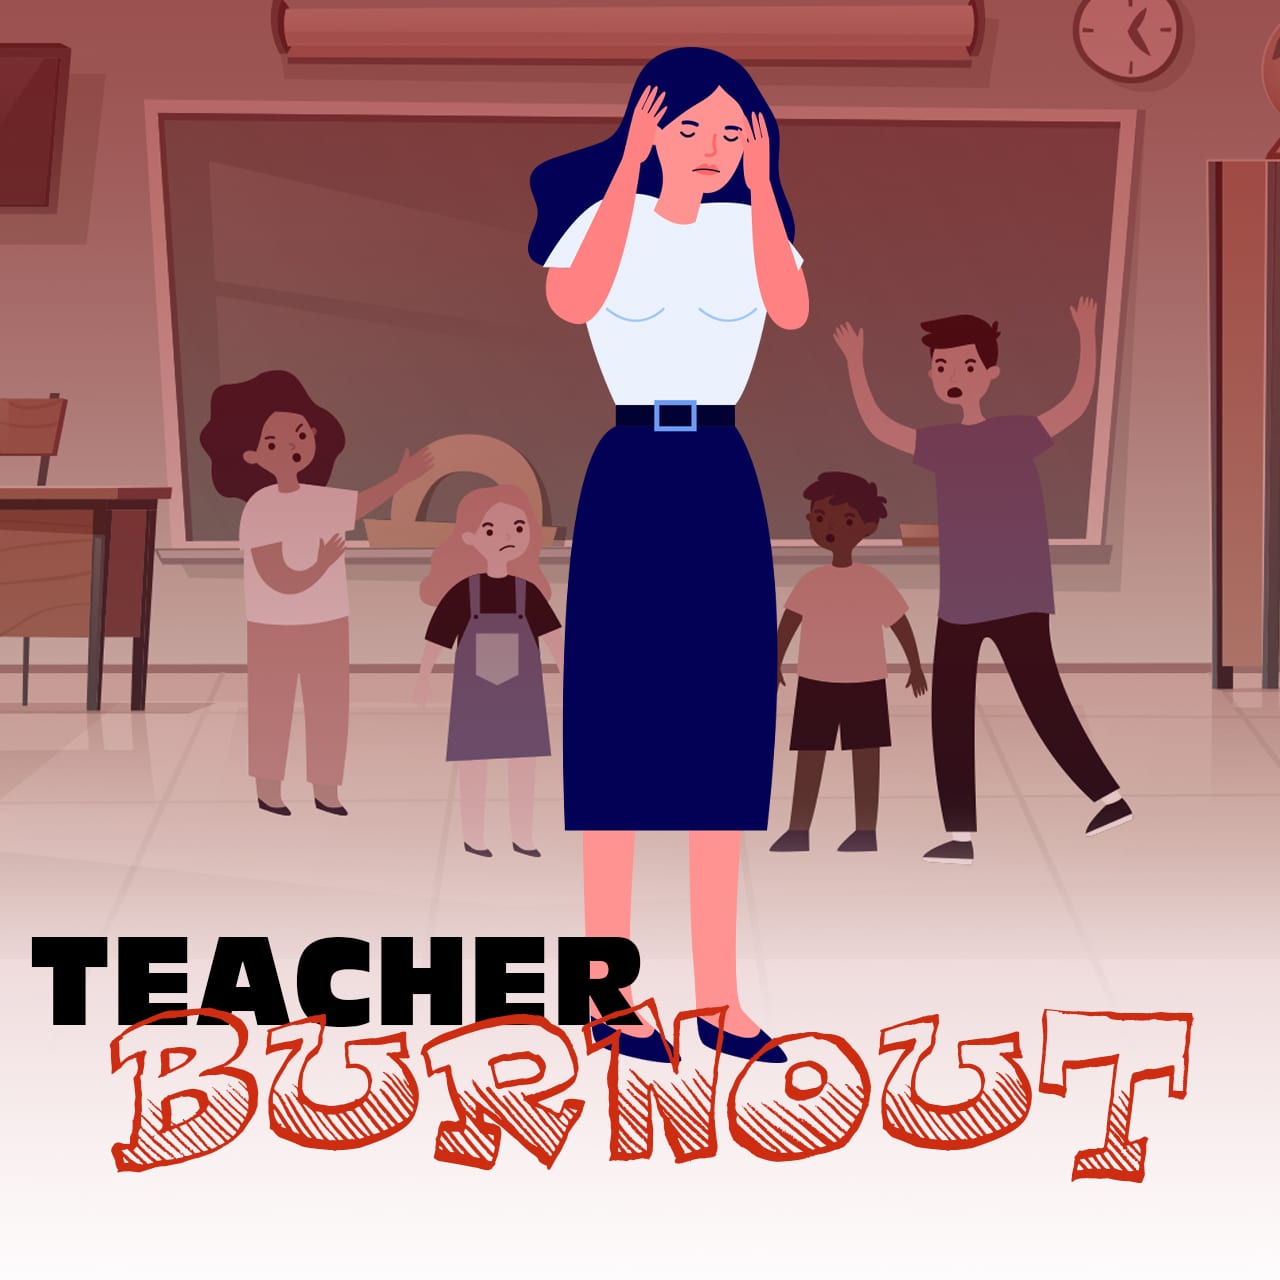 Teacher Burnout Causes, Warning Signs and How to Deal with It